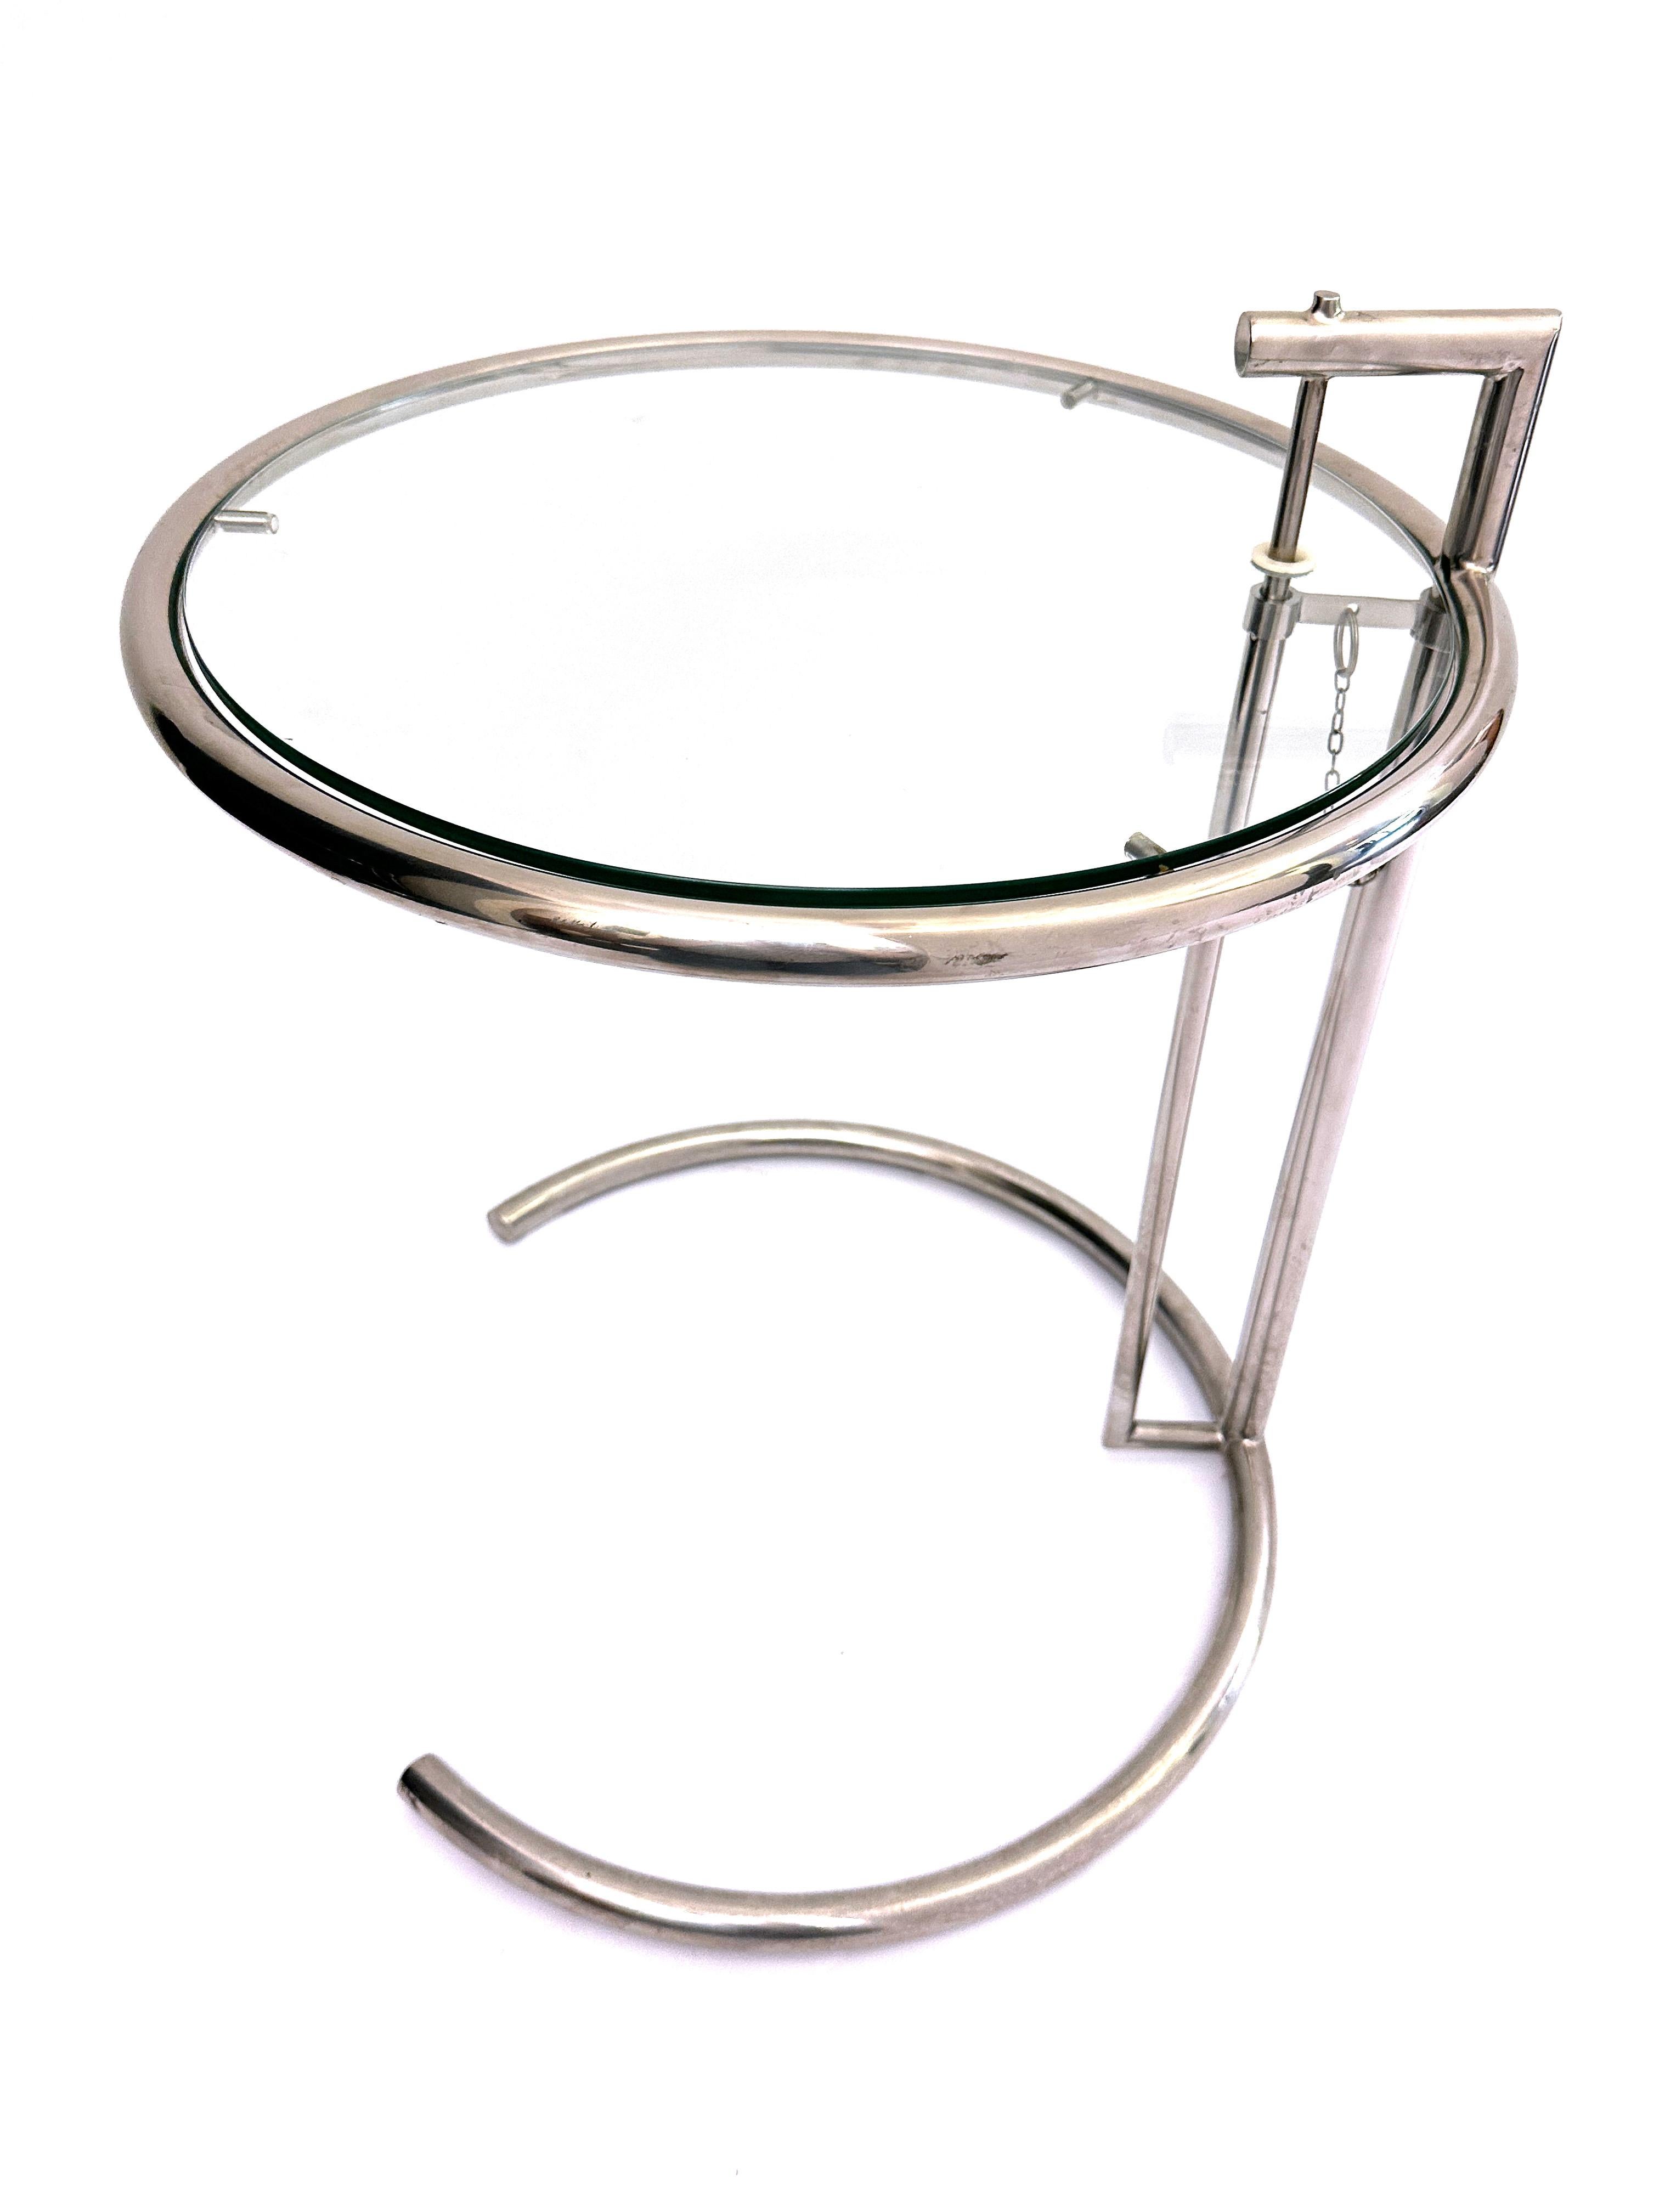 Chrome and Glas Side Table Attribited to the E-1027 Designed by Eileen Gray  For Sale 3